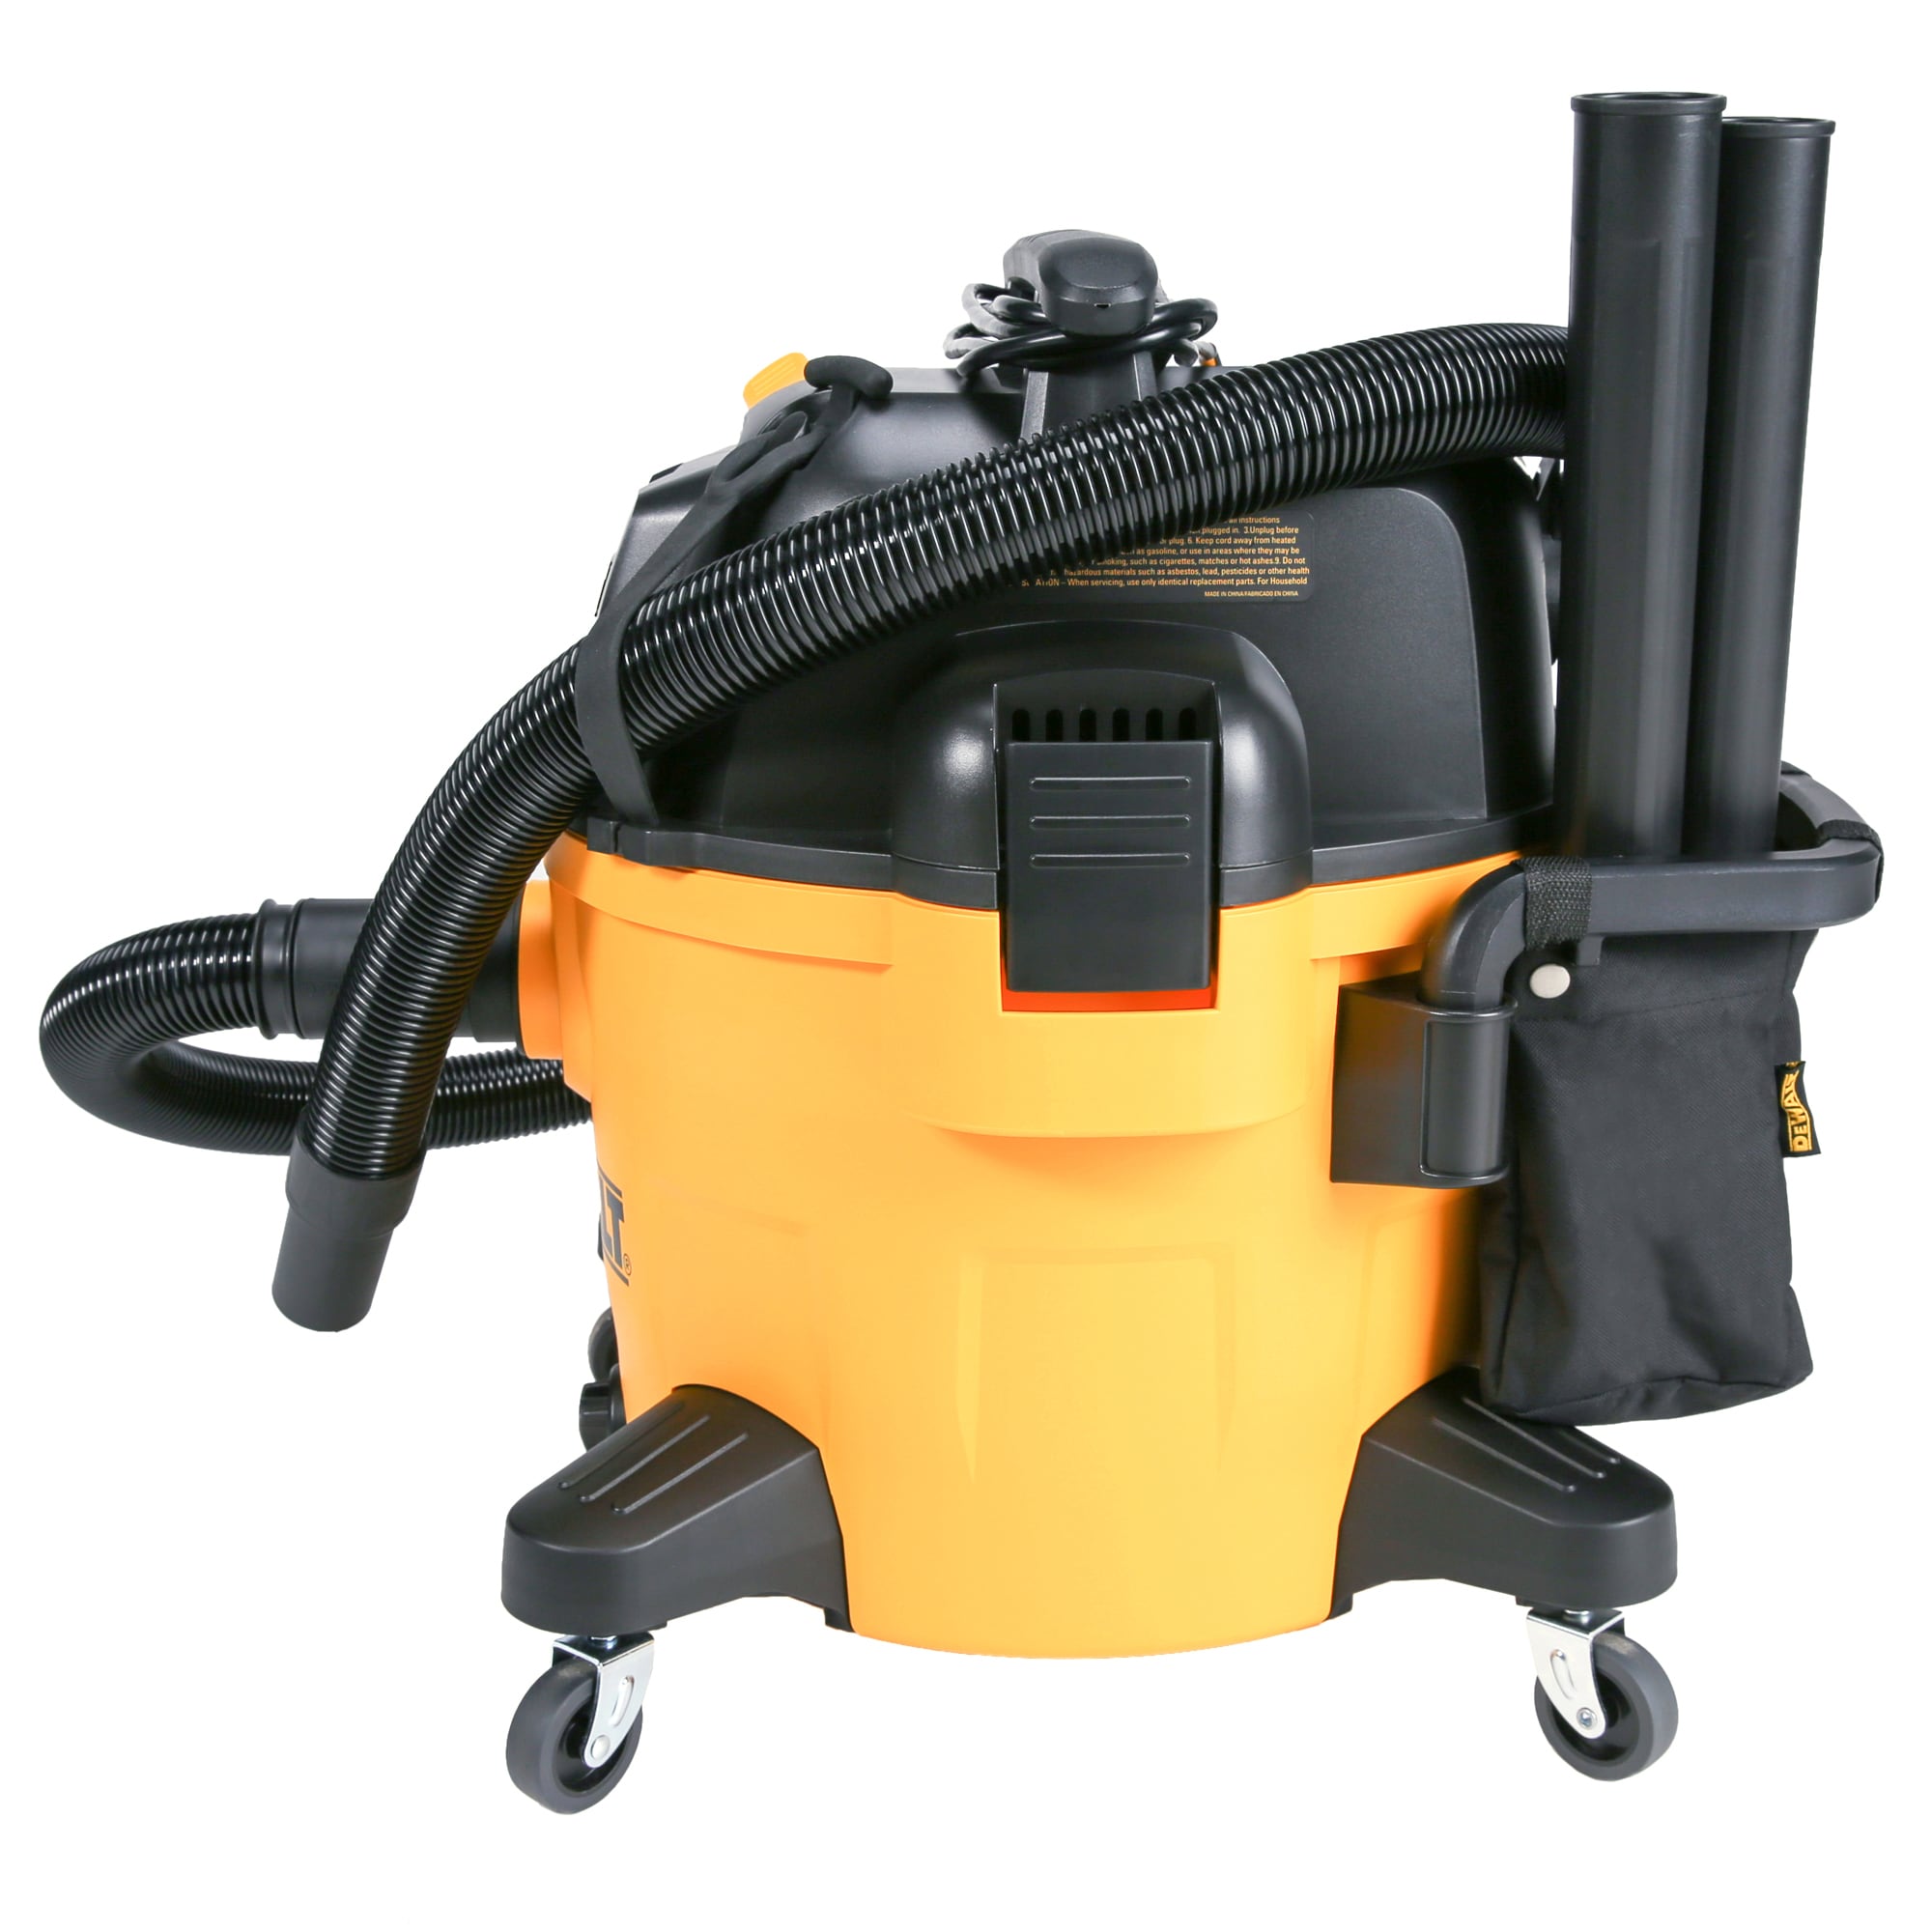 DEWALT 9-Gallons 5-HP Corded Wet/Dry Shop Vacuum with Accessories